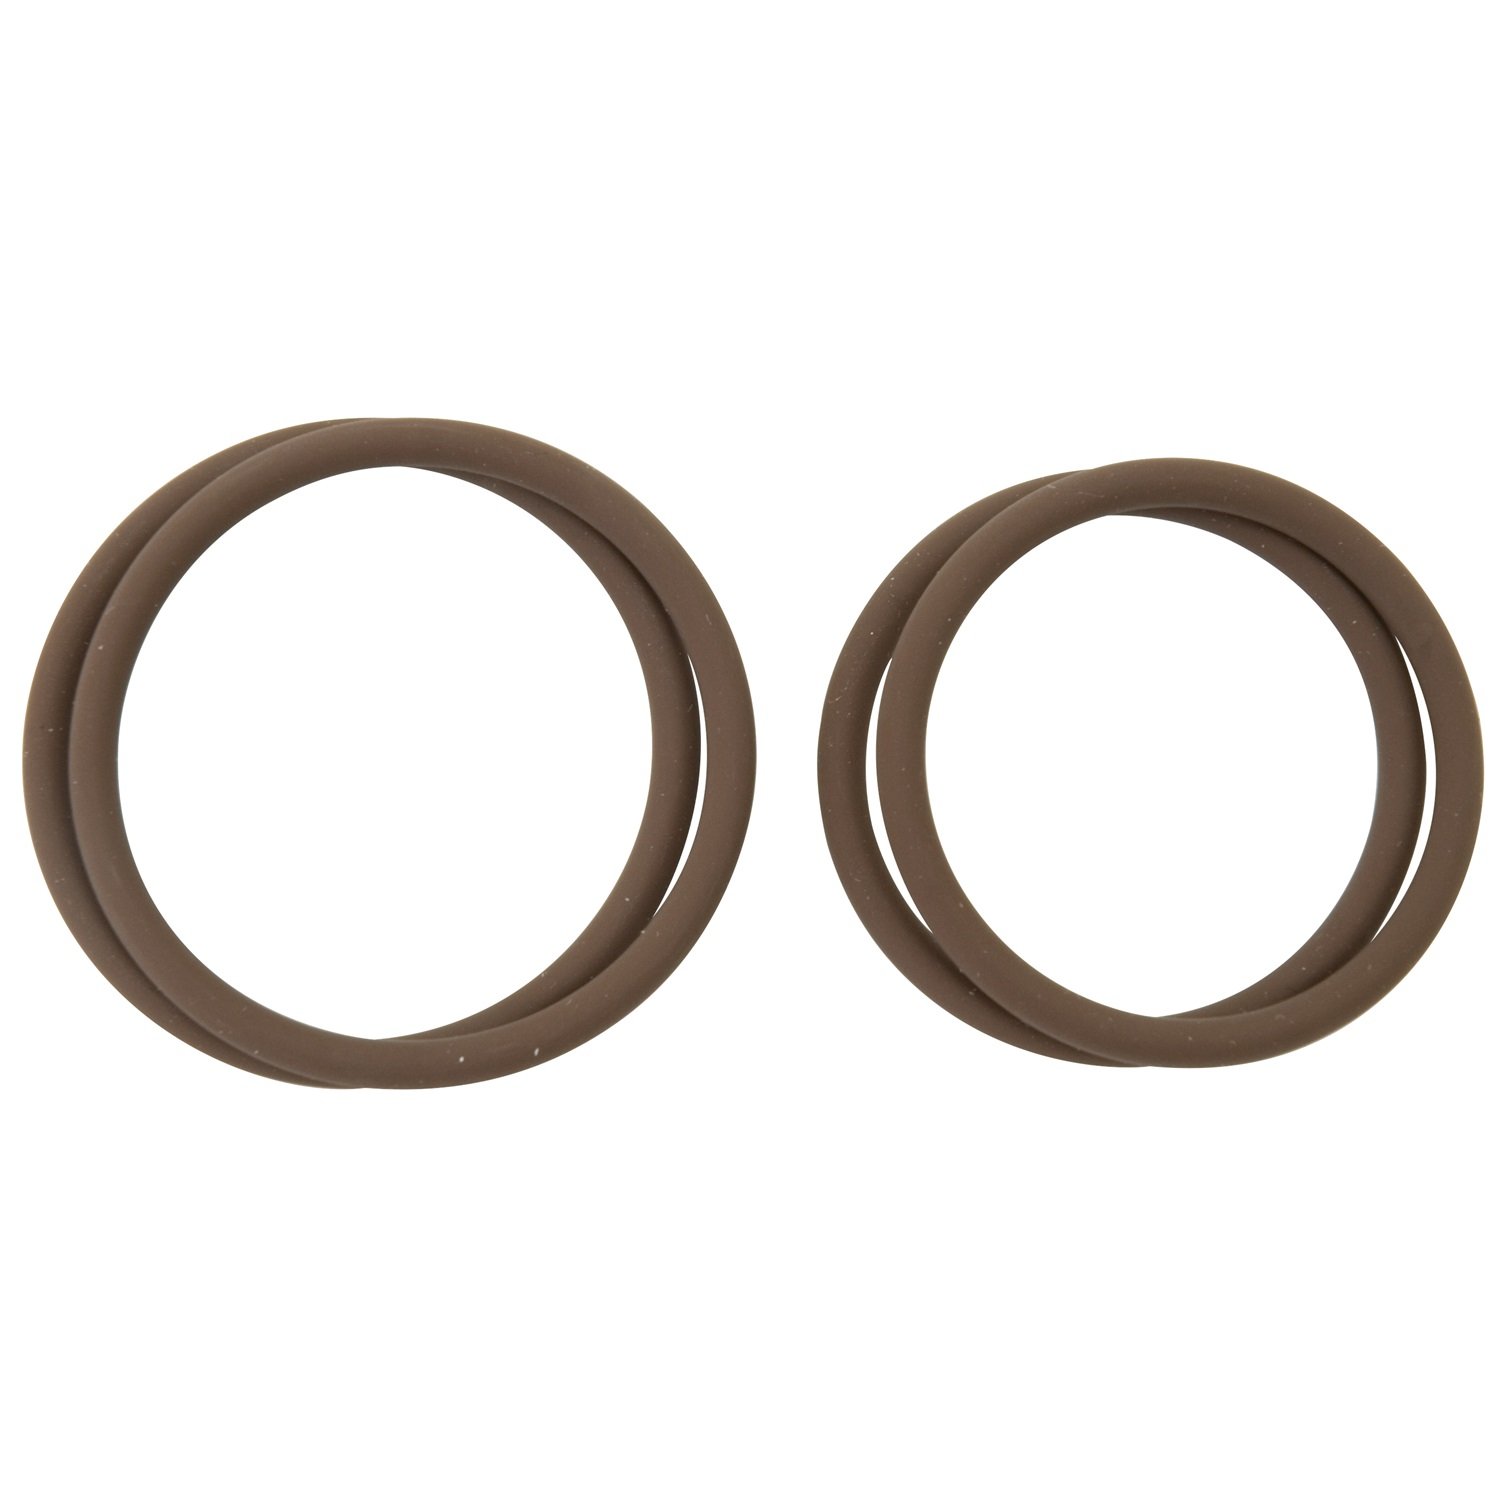 Replacement O-Ring Seals For 12" and 8-1/4" ProFilters